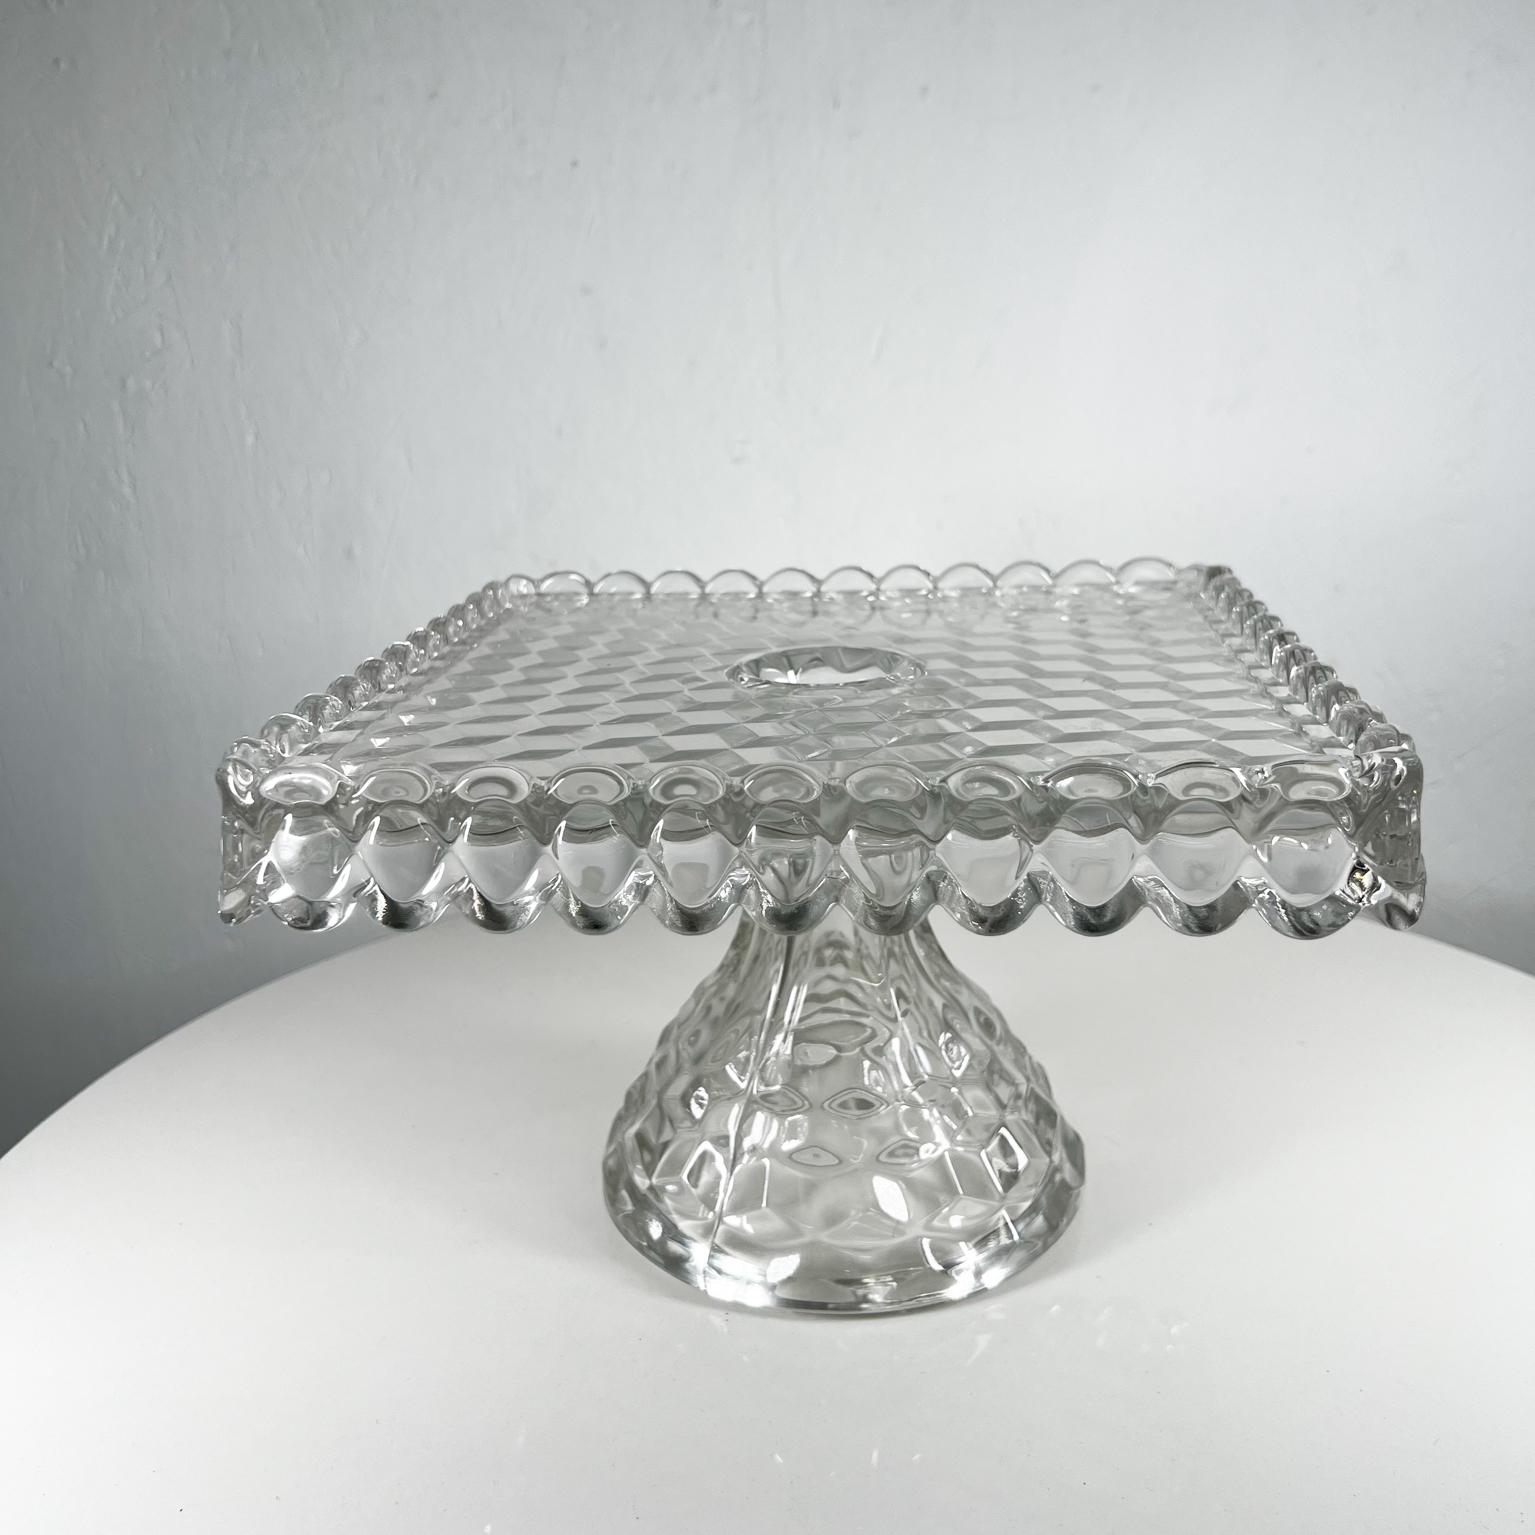 Mid-20th Century 1940s American Square Glass Pedestal Cake Stand by Fostoria